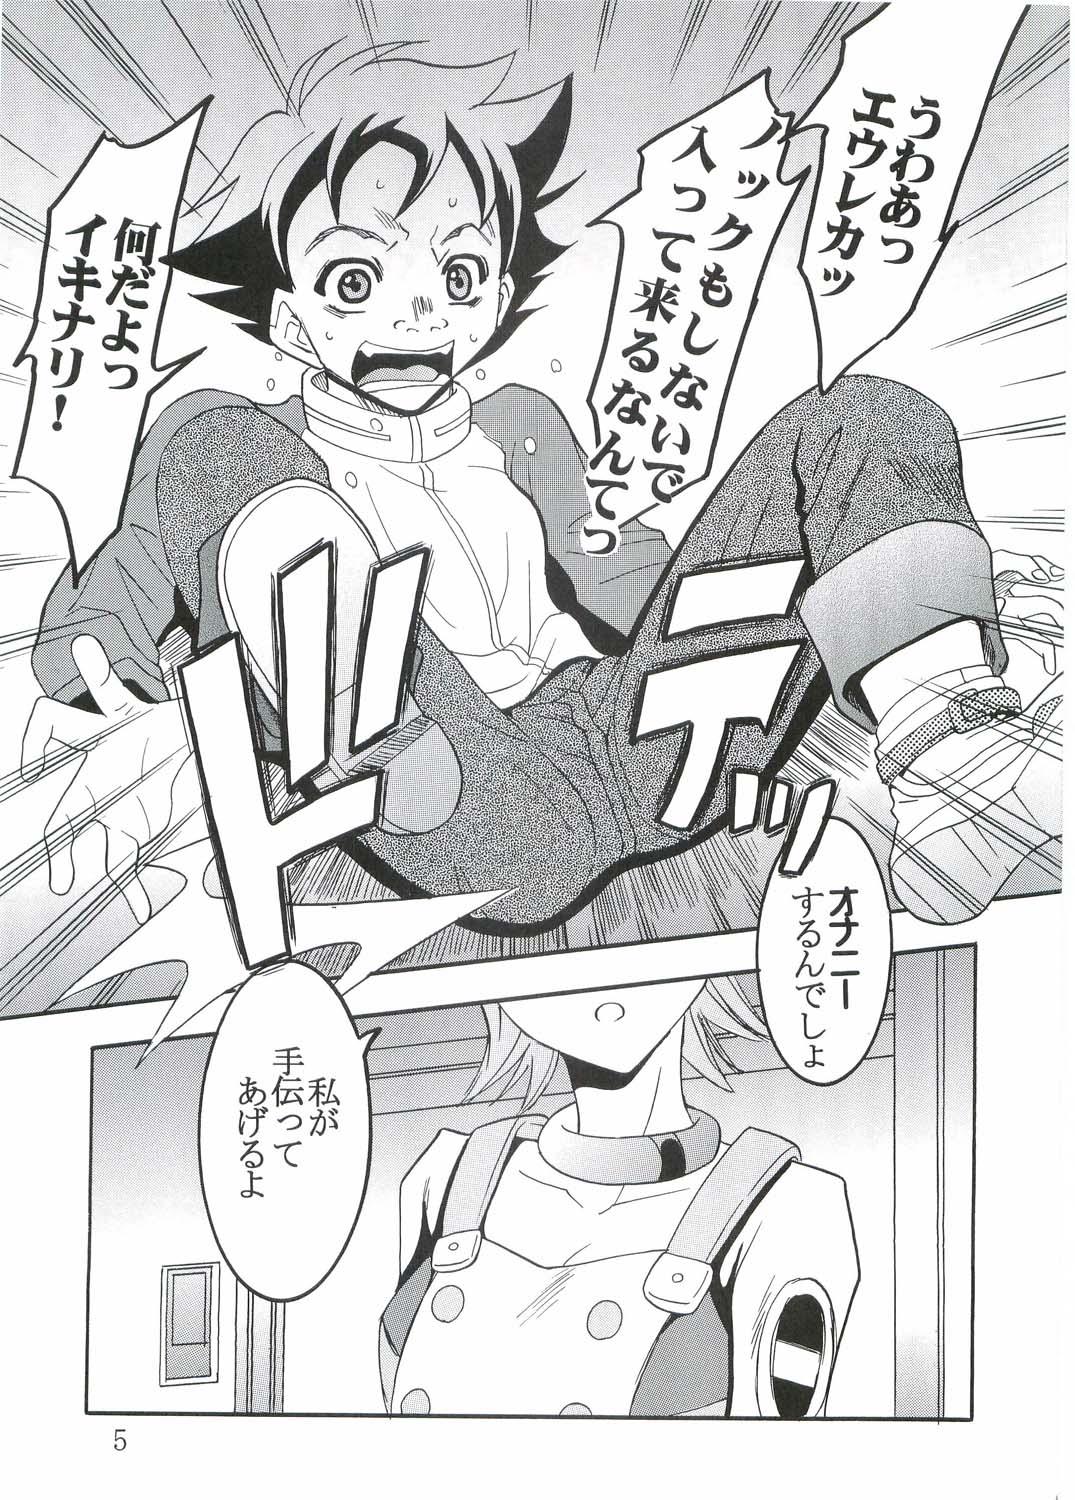 Doublepenetration Ura ray-out - Eureka 7 Tinytits - Page 6